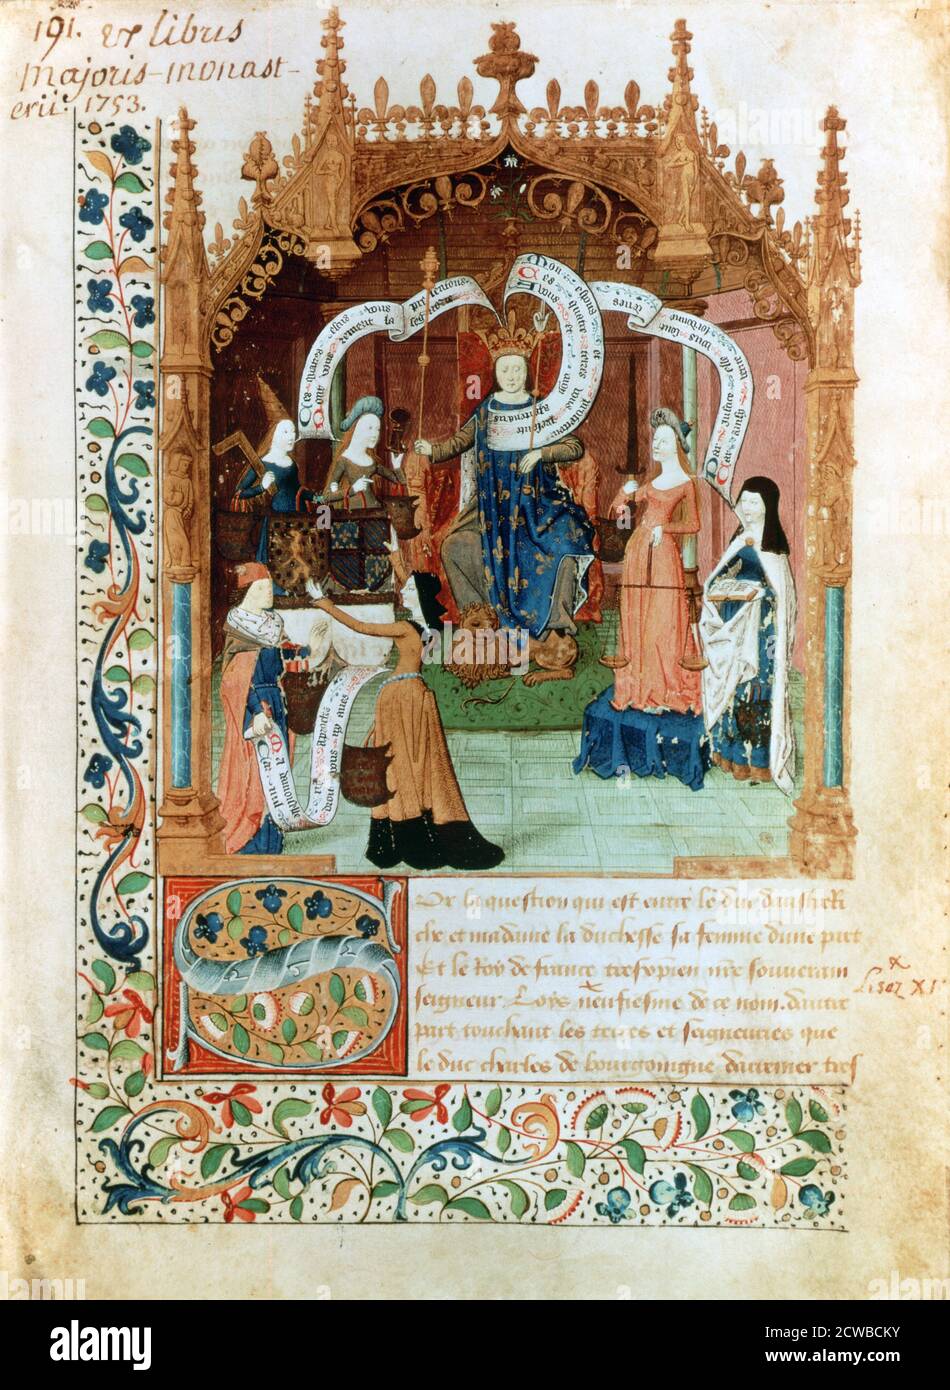 Louis XI, 15th century. Louis, with his feet on a lion, and the allegorical figures of Justice and Truth. From the collection of the Bibliotheque Nationale, Paris and the artist is unknown. Stock Photo